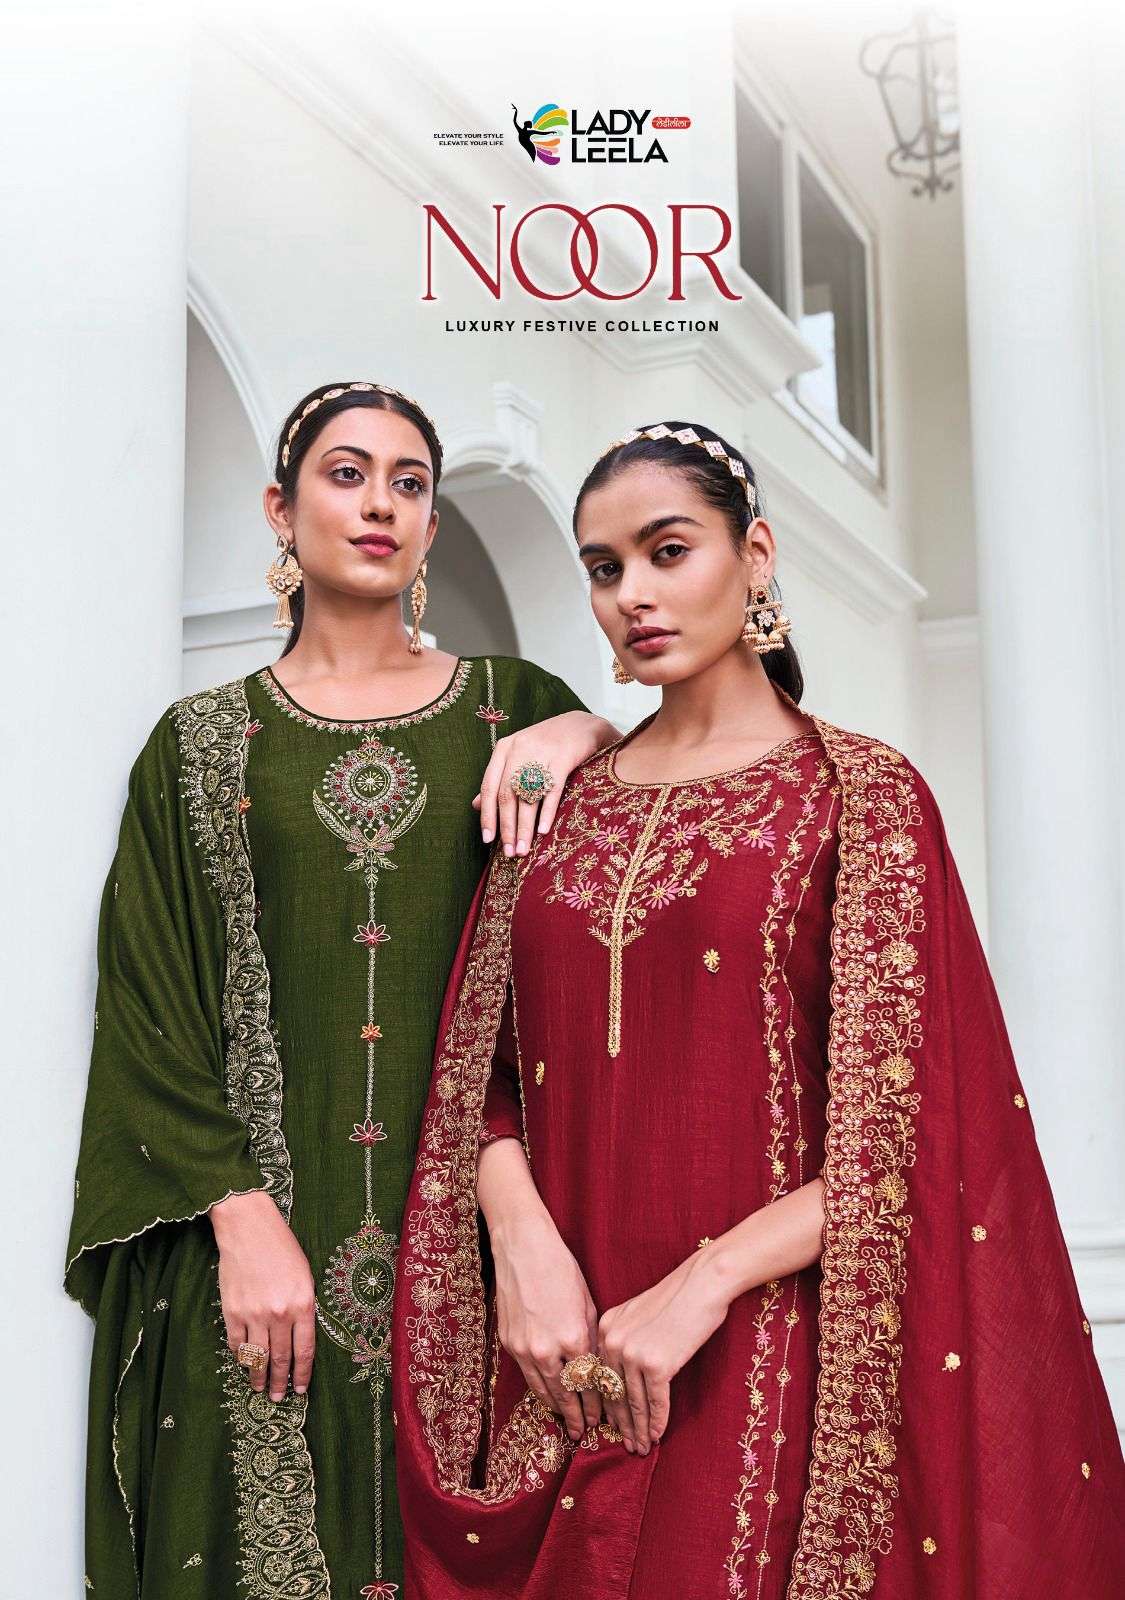 NOOR VENICE SILK EMBRIODERY AND HANDWORK KURTI WITH PANT AND DUPATTA BY LADY LEELA BRAND WHOLESALER ...